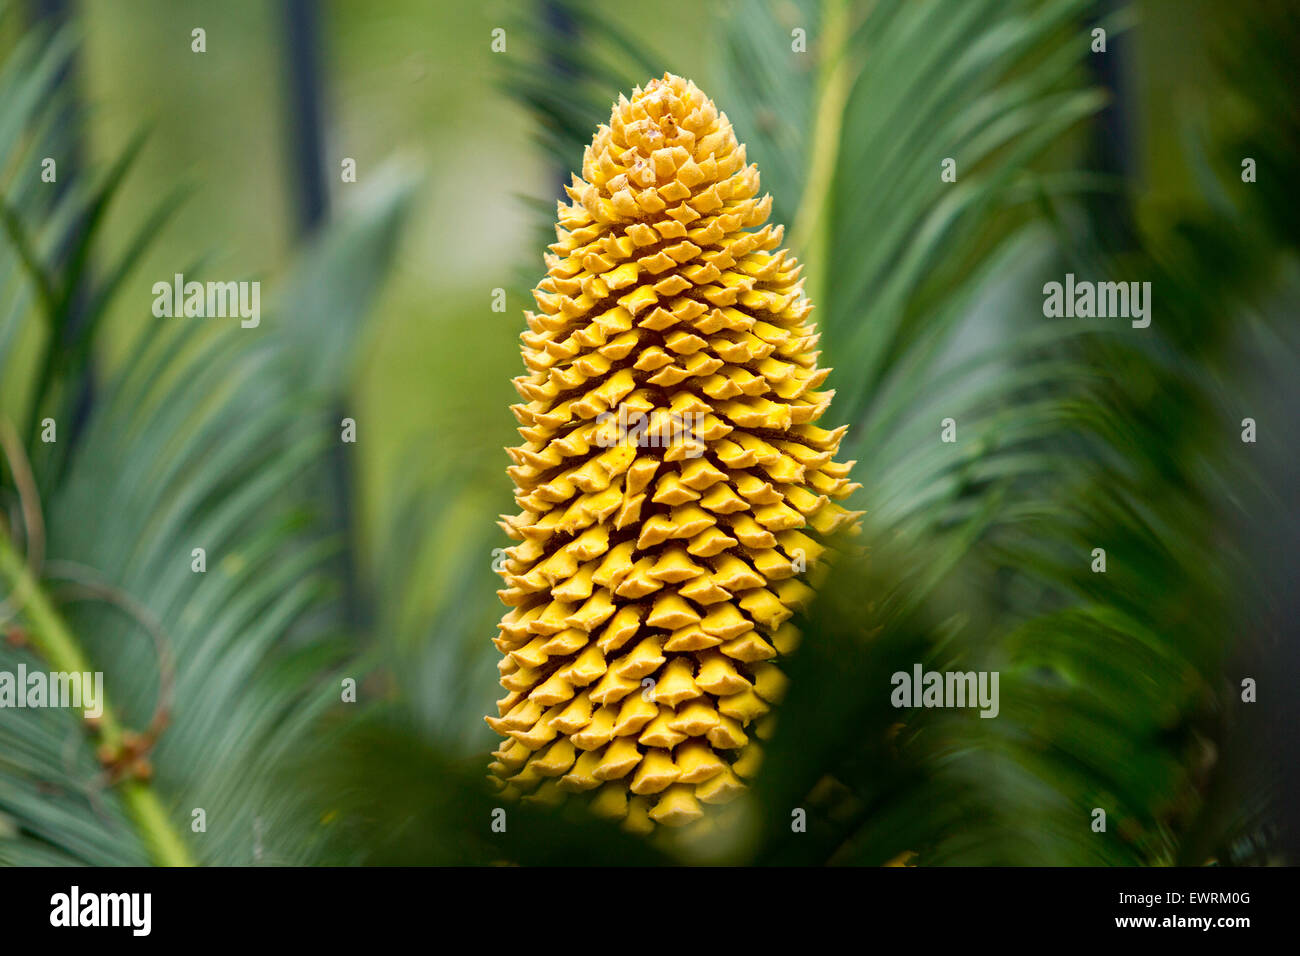 A Sago Palm Cone at full growth Stock Photo